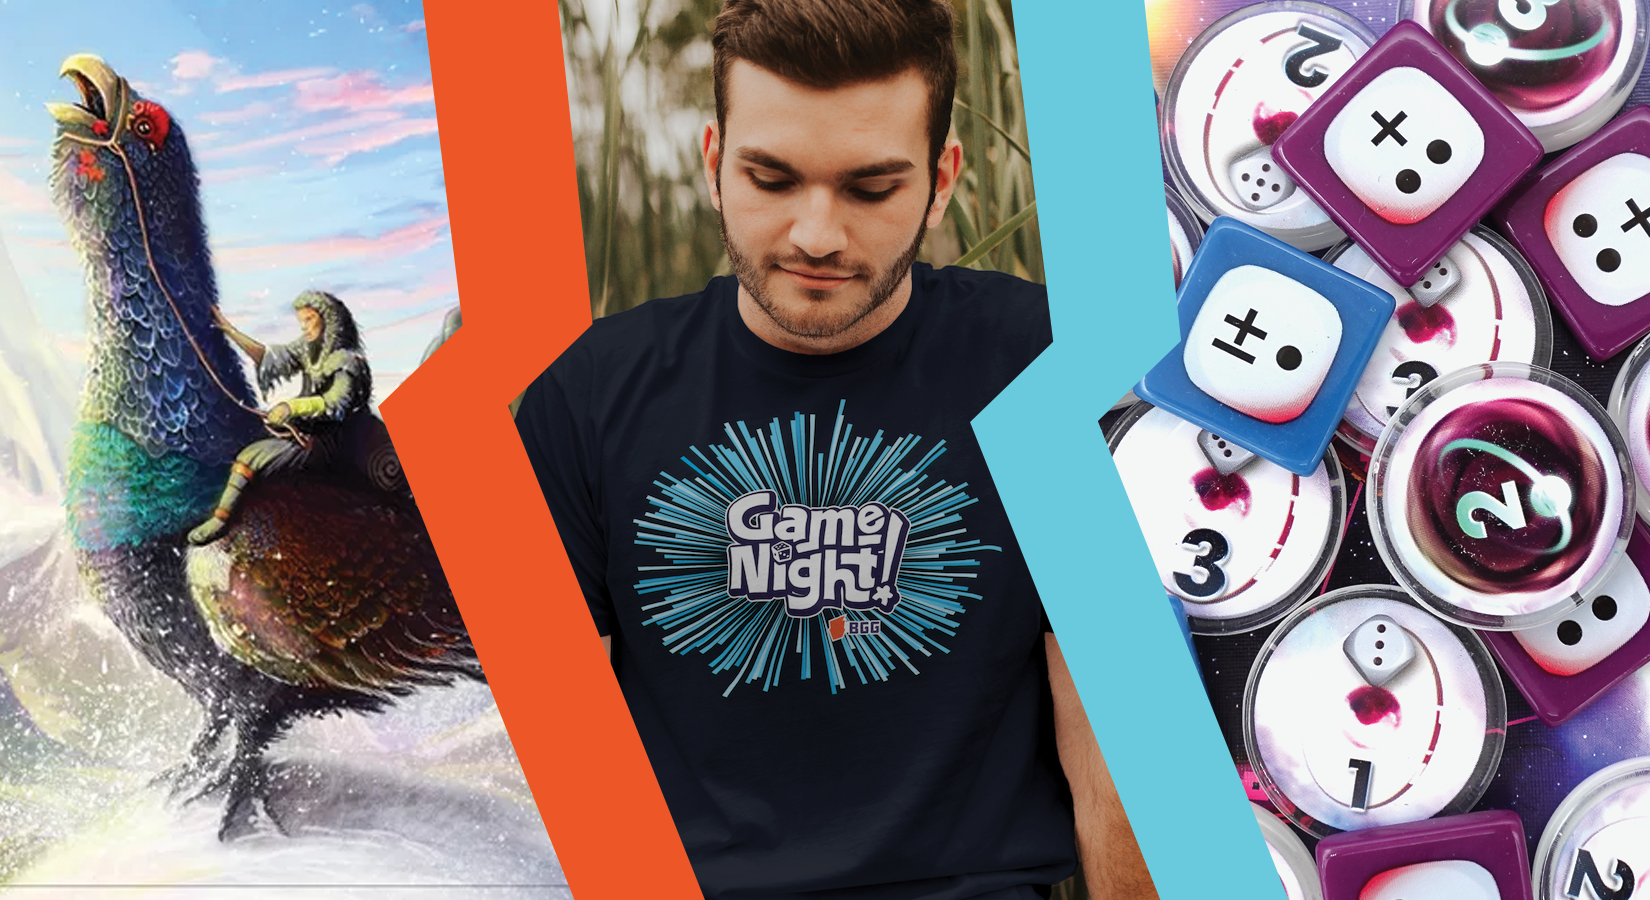 A composite image of three pictures, separated by colorful, diagonal borders. On the left is an illustration of a man riding a giant chicken. In the center is a photo of a bearded white man wearing a t-shirt with the words "Game Night" printed in the center. On the right is a photo of a pile of plastic game pieces, printed with symbols and numbers.